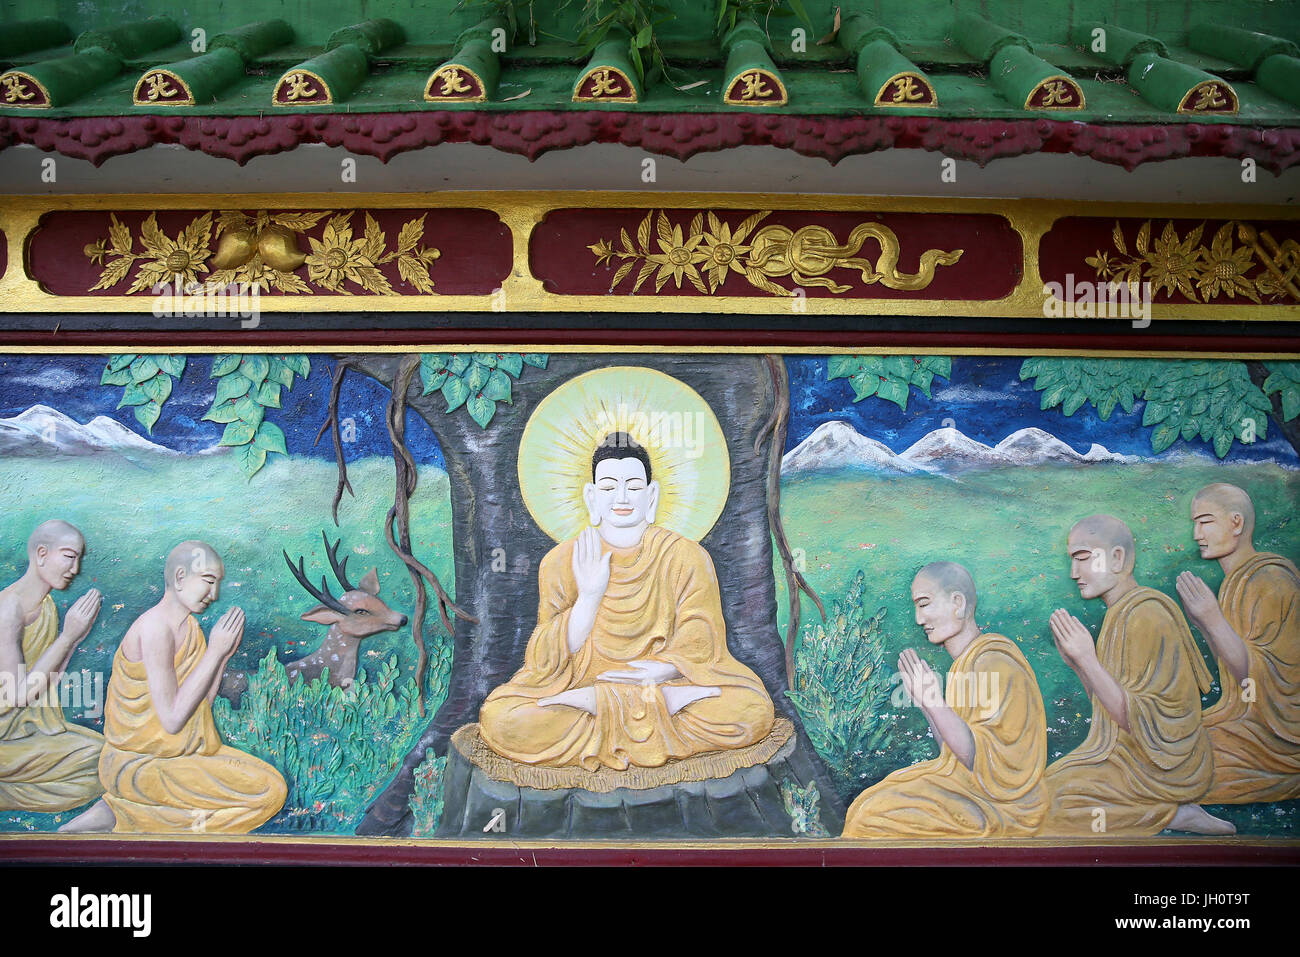 Buddhist temple. Thien Minh Pagoda. Shakyamuni Buddha. The first discourse. The Buddha preaching the sermon - the wheel of law - to his five disciples Stock Photo